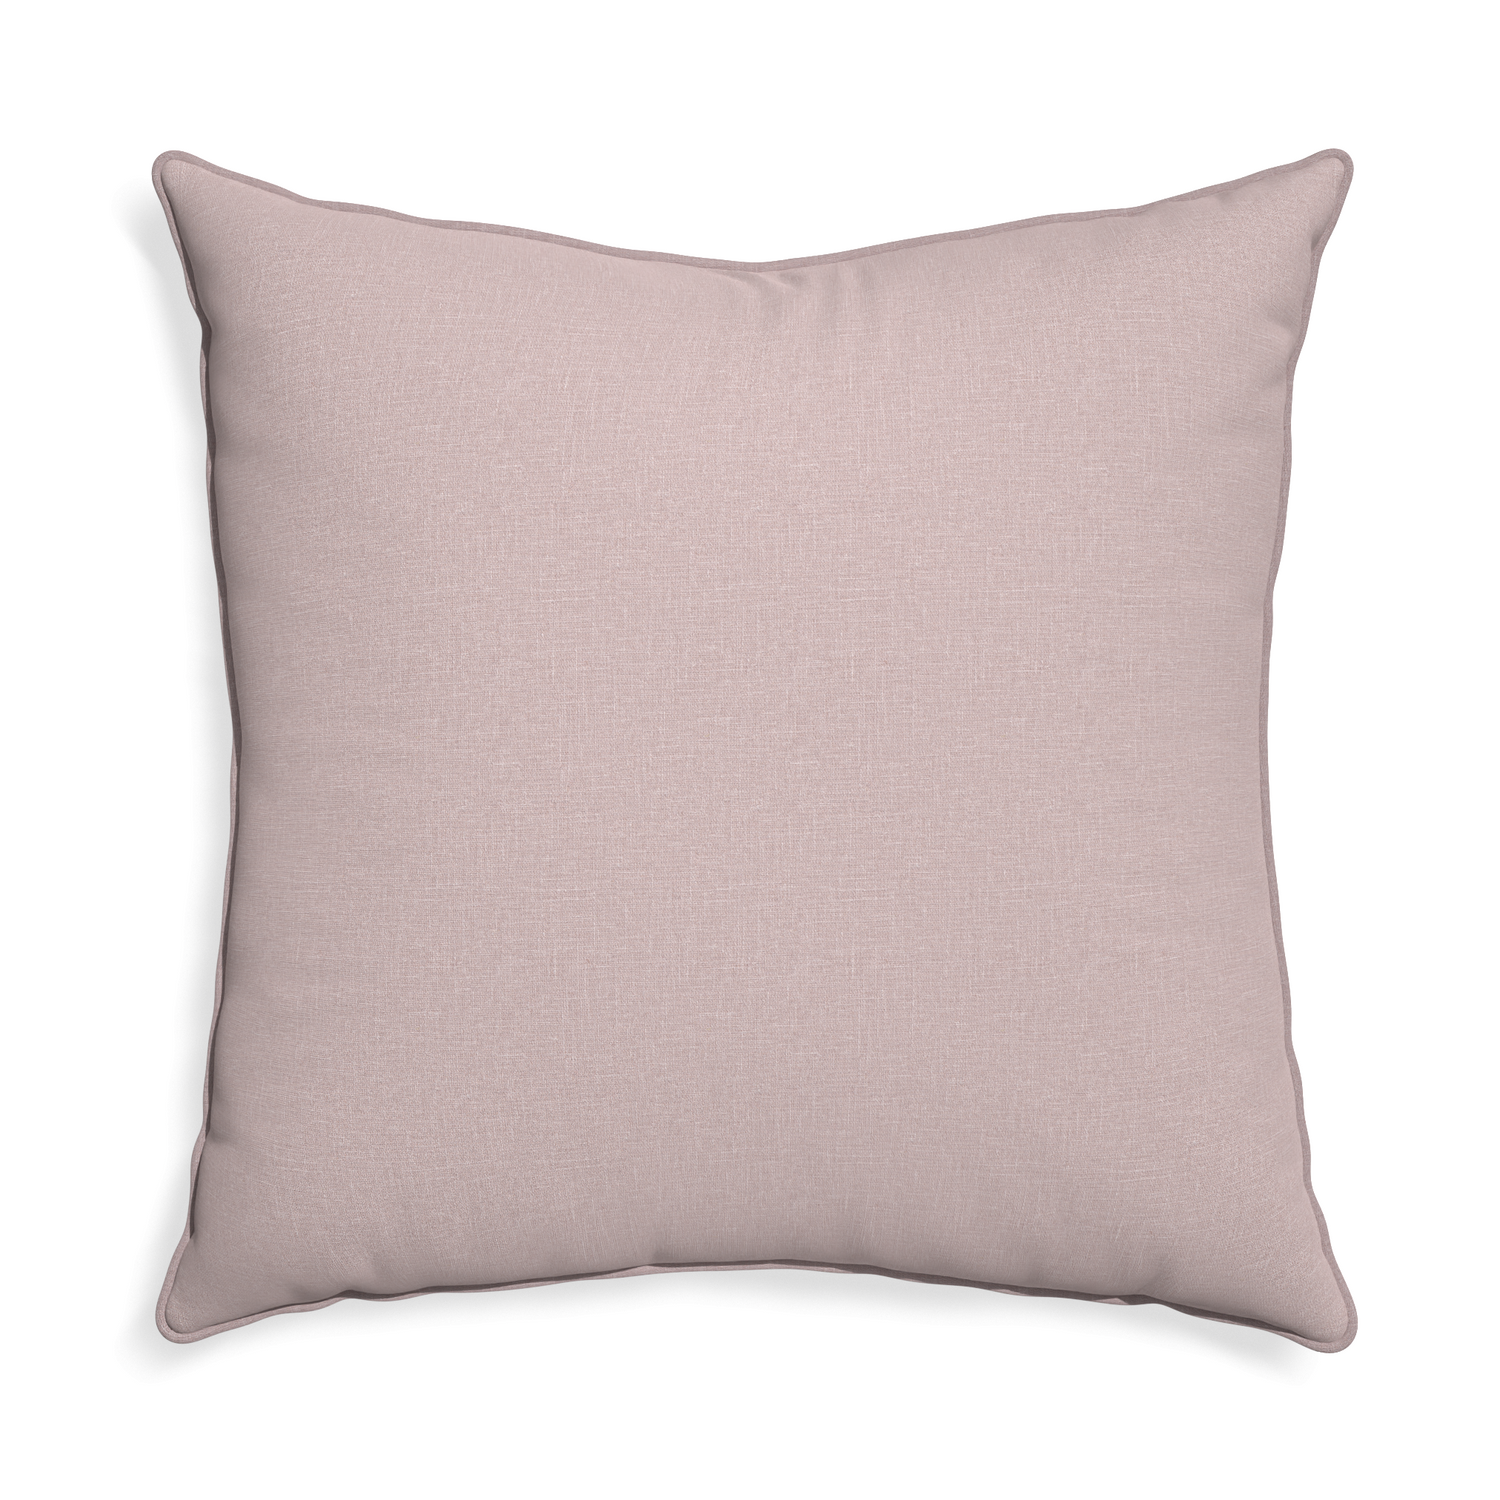 Euro-sham orchid custom mauve pinkpillow with orchid piping on white background